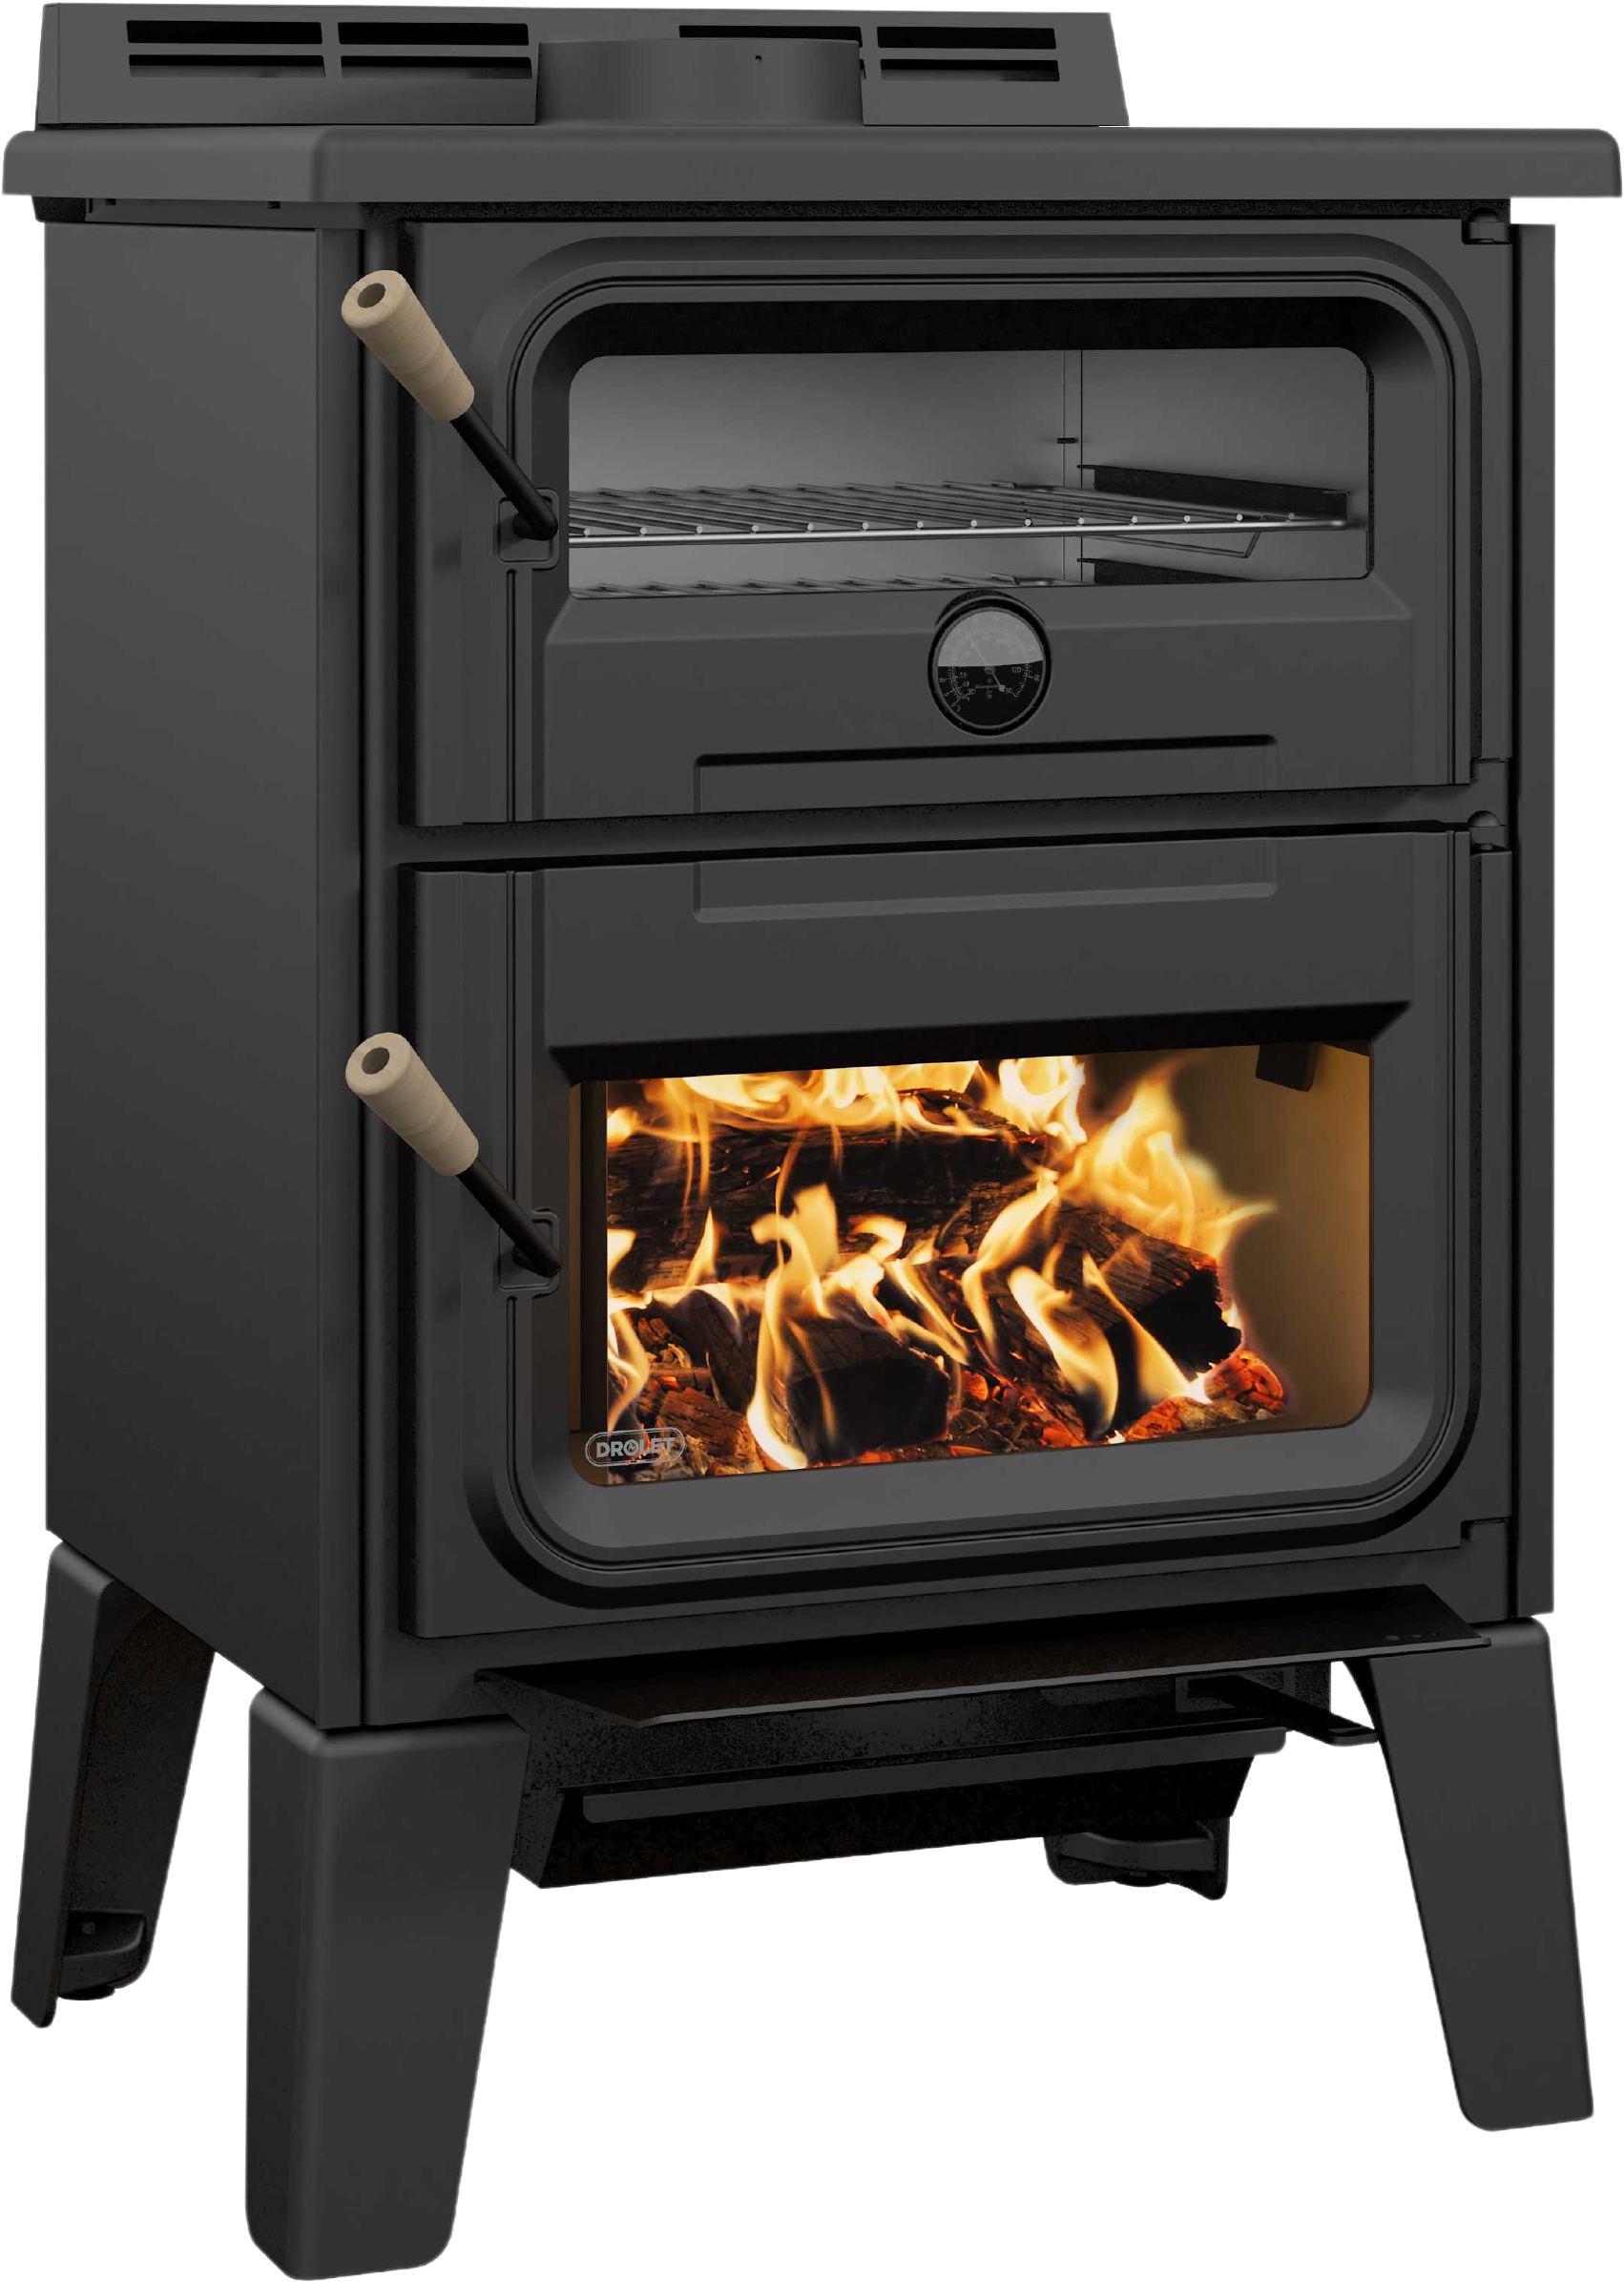 How to Use a Wood Cookstove